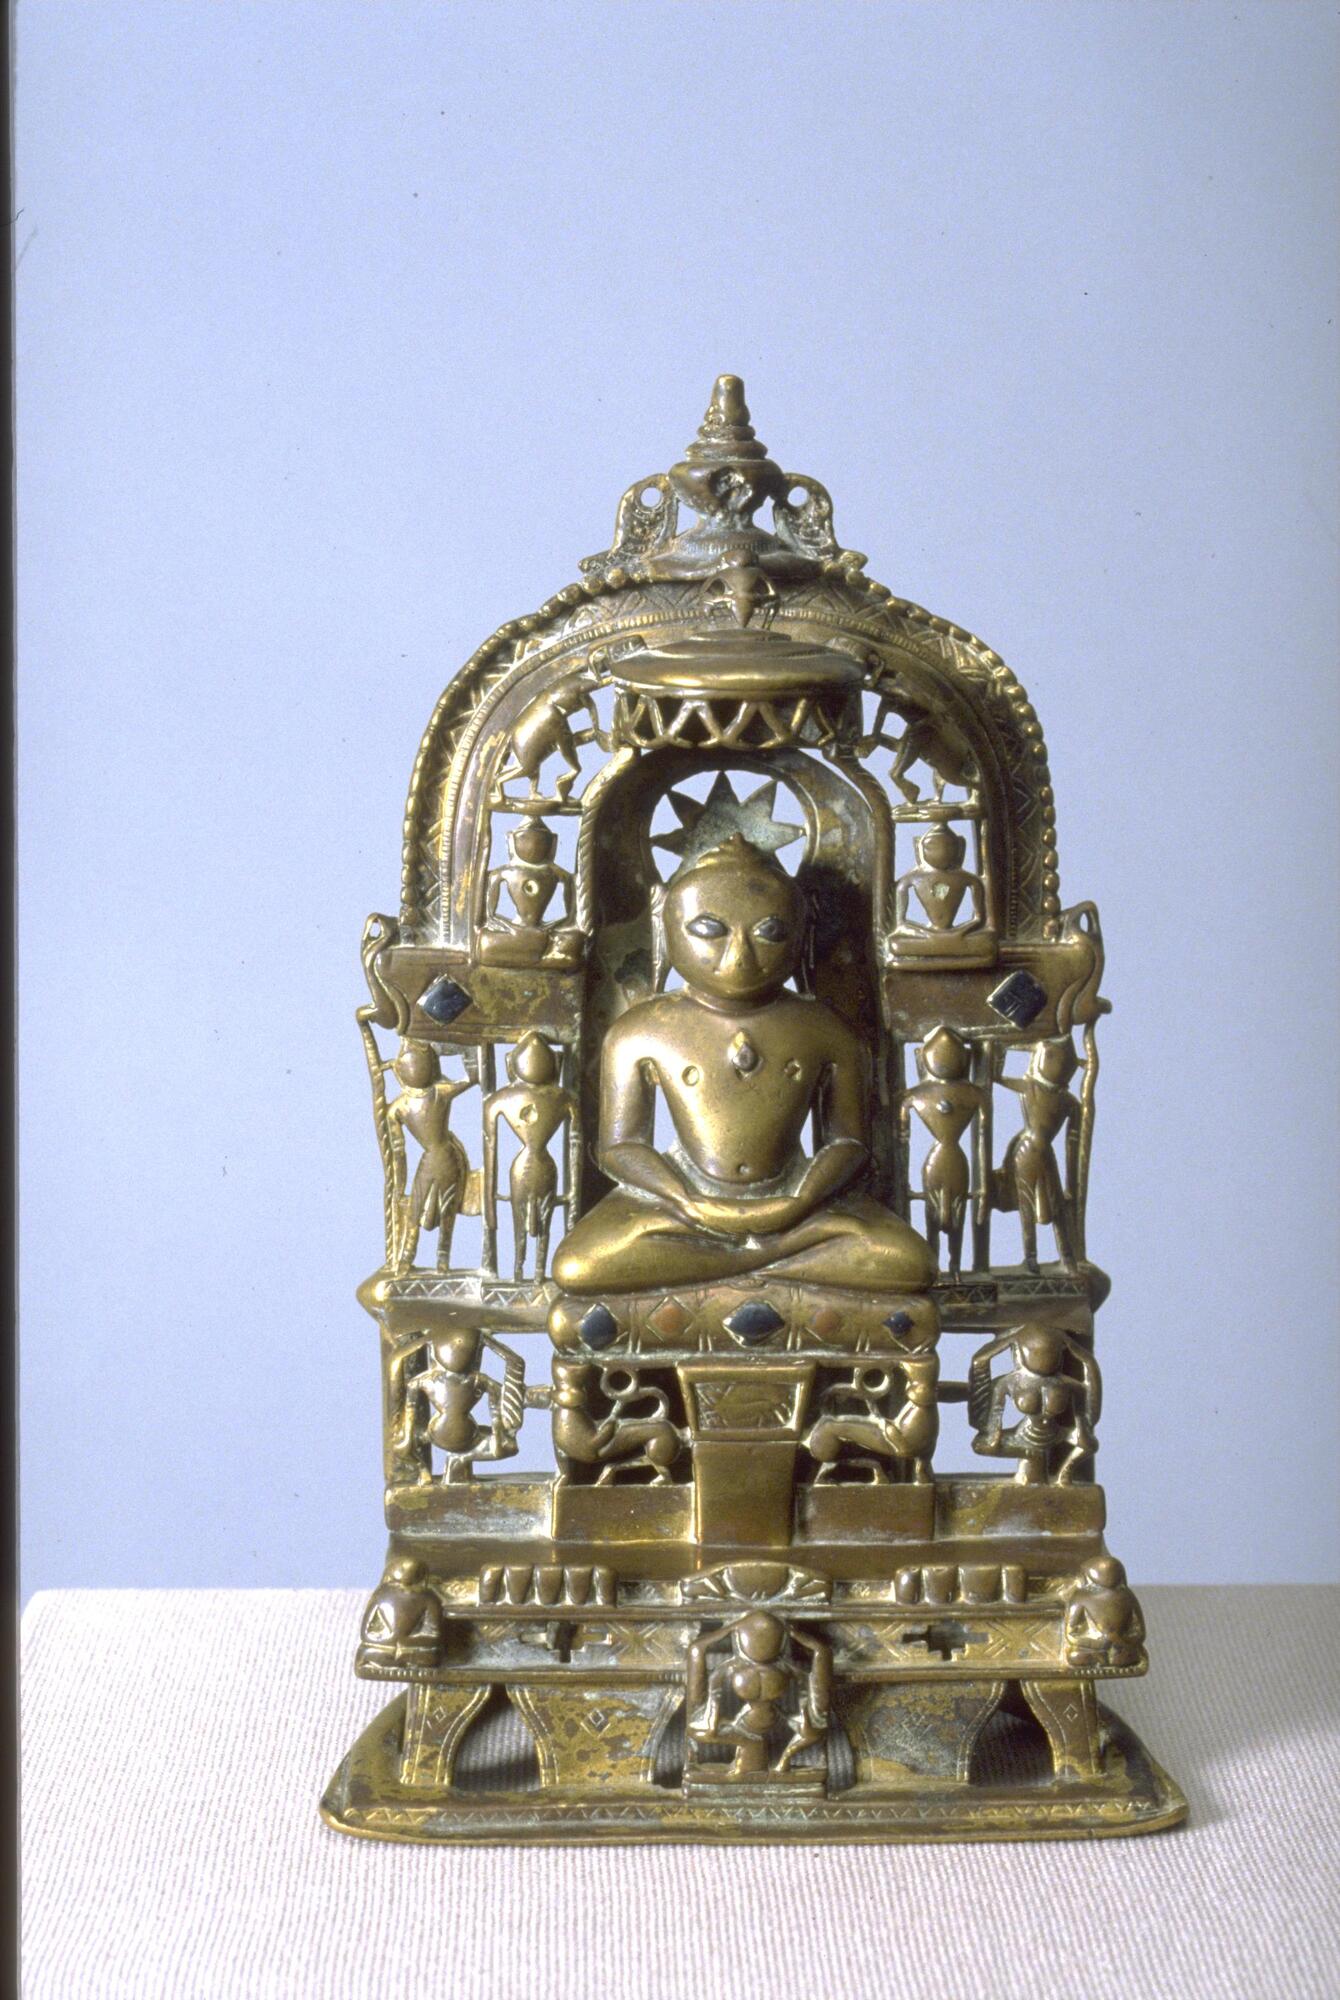 The jina Malli sits in the lotus position on an inlayed cushion on a tiered throne. Seated with his hands folded in a gesture of meditation, he is surrounded by a number of figures representing other jinas, attendants and demigods. In the center in front of the throne sits the goddess Ambika with a child on her lap.  On the first tier of the throne sit two figures that may represent donors.  On the next left are nine mounds representing the nine planets [navagraha], five to his right and four to his left.  At the base of his seat are two stylized lions and this is flanked by a male and female demigod.  On the arch surrounding the figure at his level a standing jina figure is to each side and cauri bearer is on the outside of each of them.  At his shoulders, the cross bars of the throne back end in stylized makara heads with jewels hanging from their mouths.  A seated jina adorns the arch to each side of his head and elephants surmount them with an umbrella over his head with a dancing figure atop it.  The who